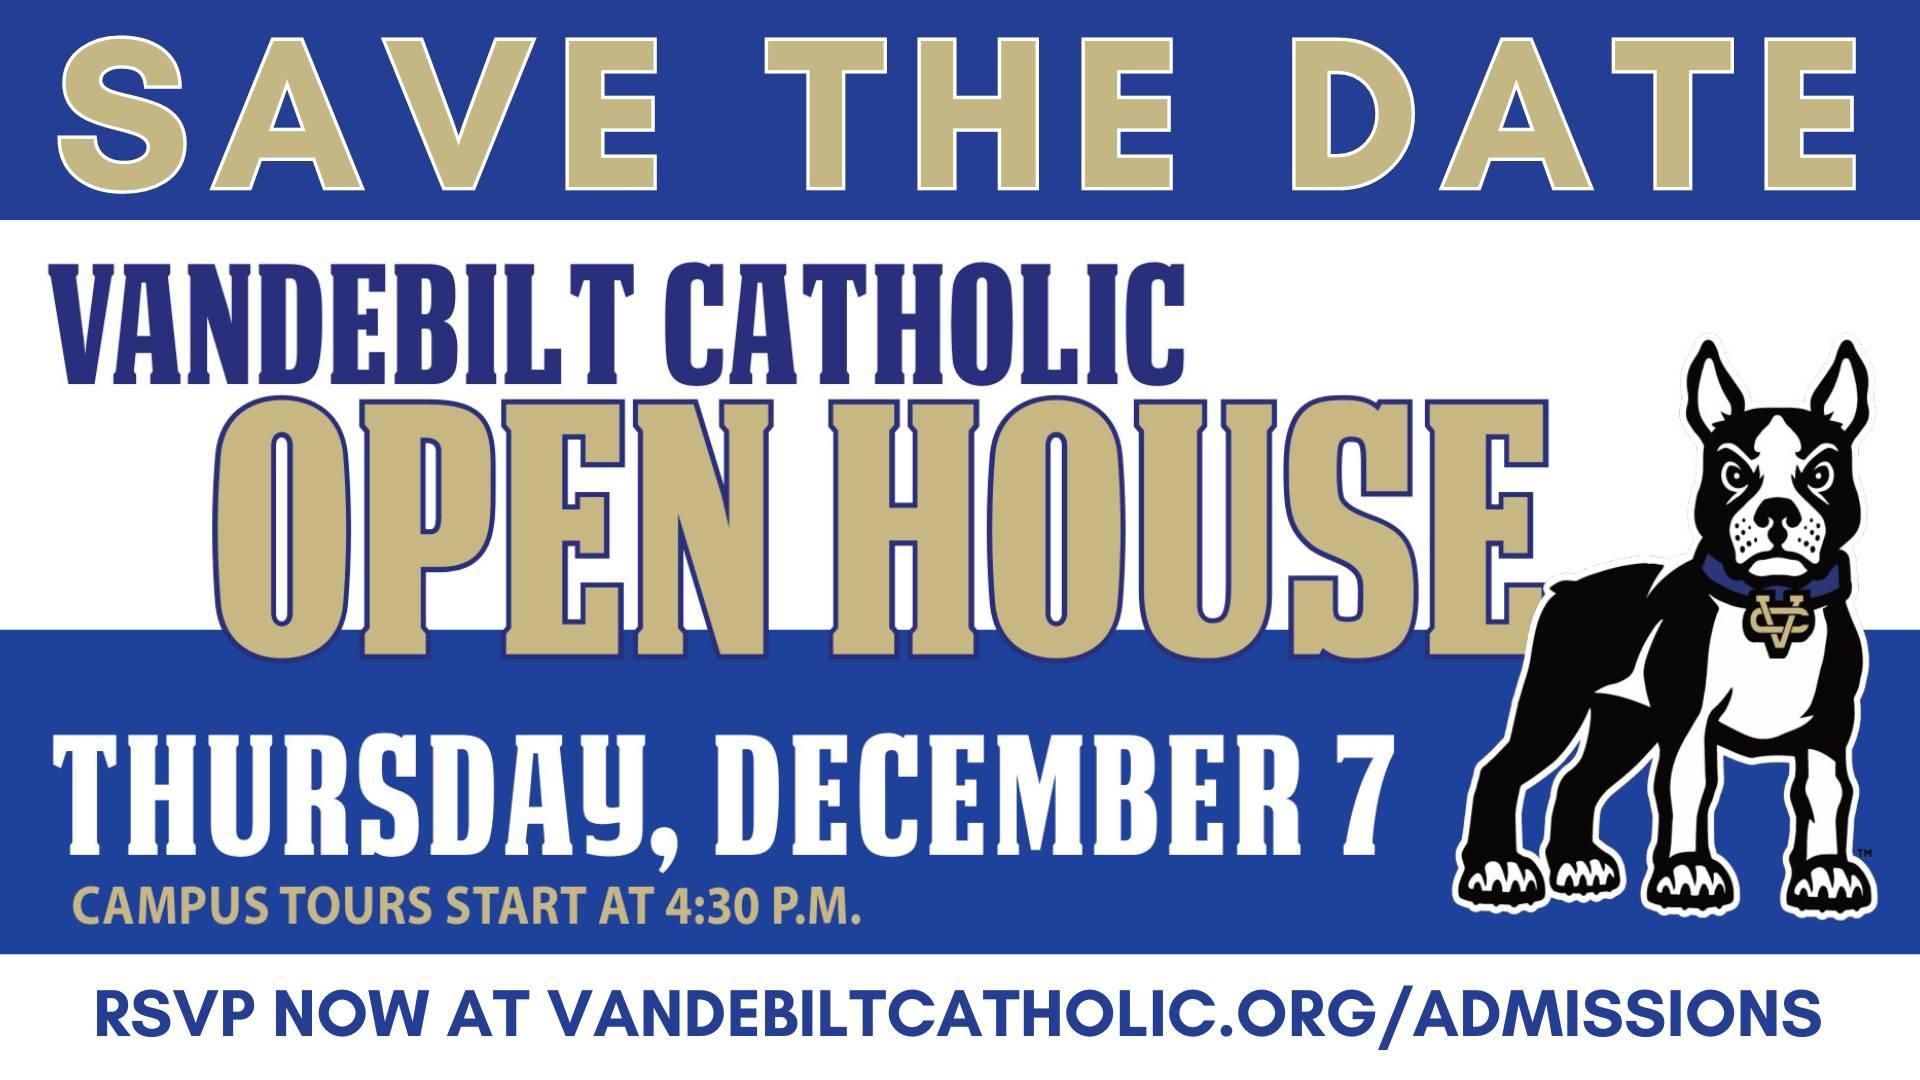 A save the date sign for the vandebilt catholic open house